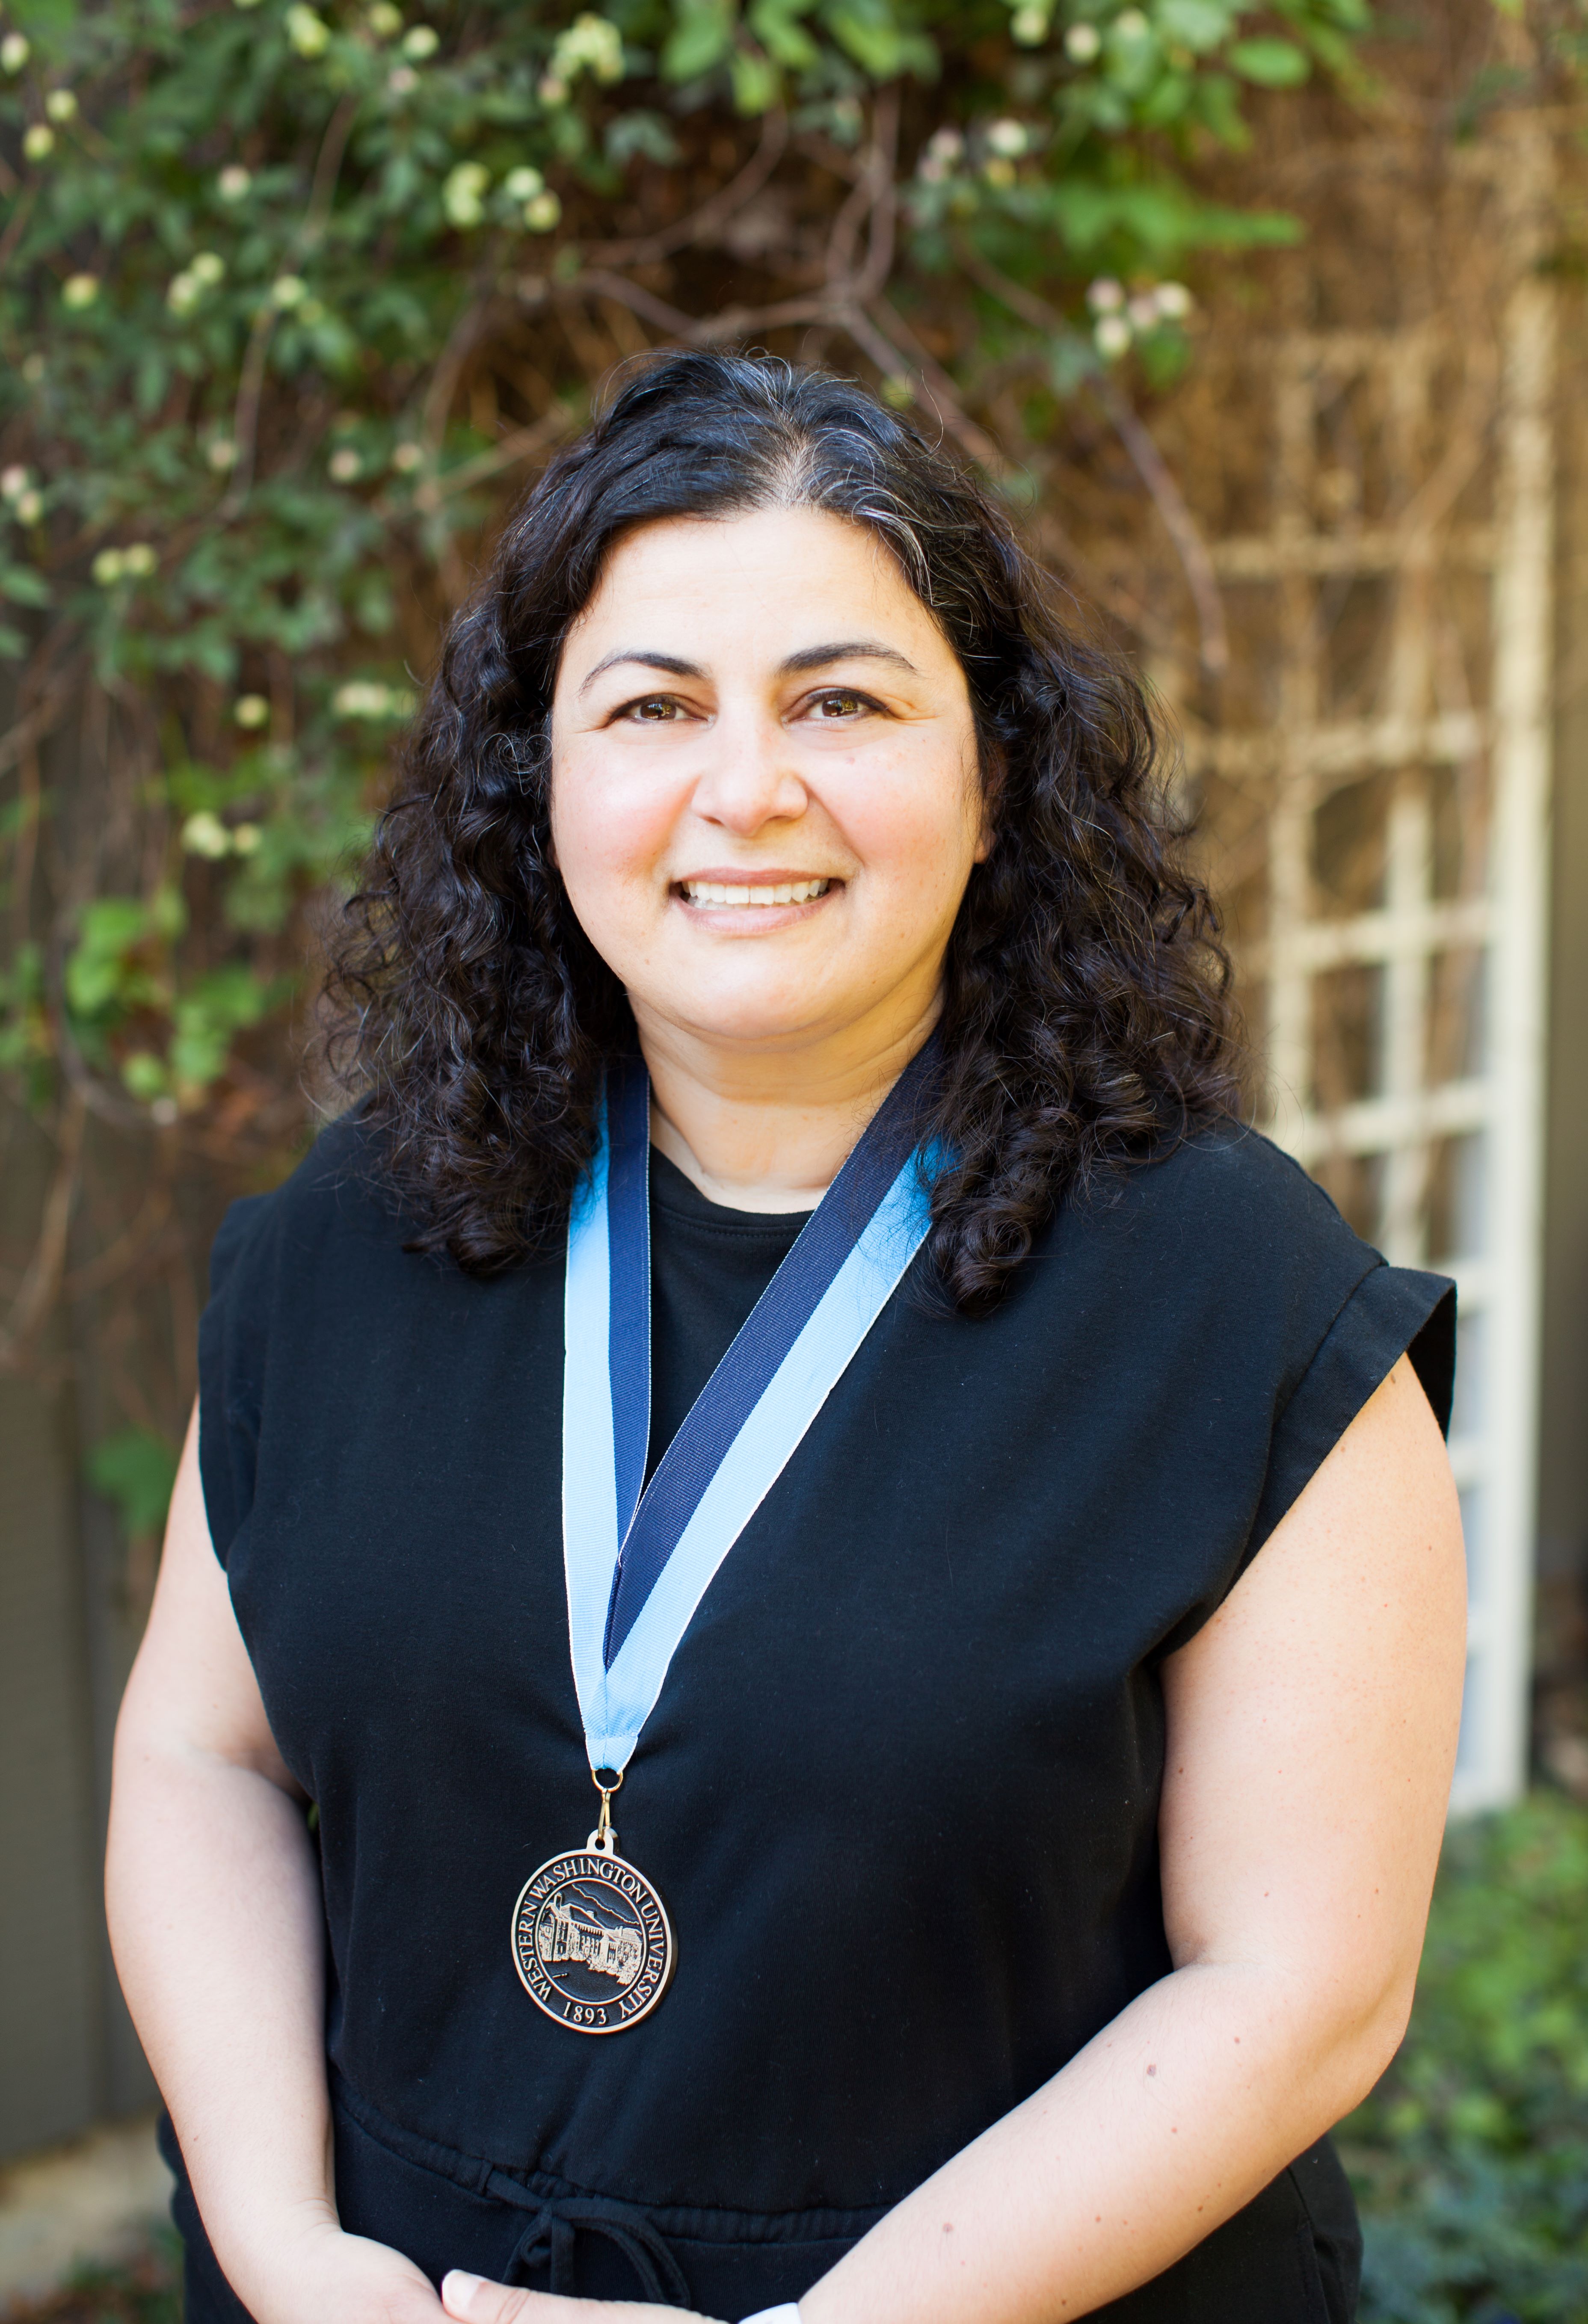 Shirin Deylami smiling warmly and wearing a black top and a WWU award medallion on a neck ribbom